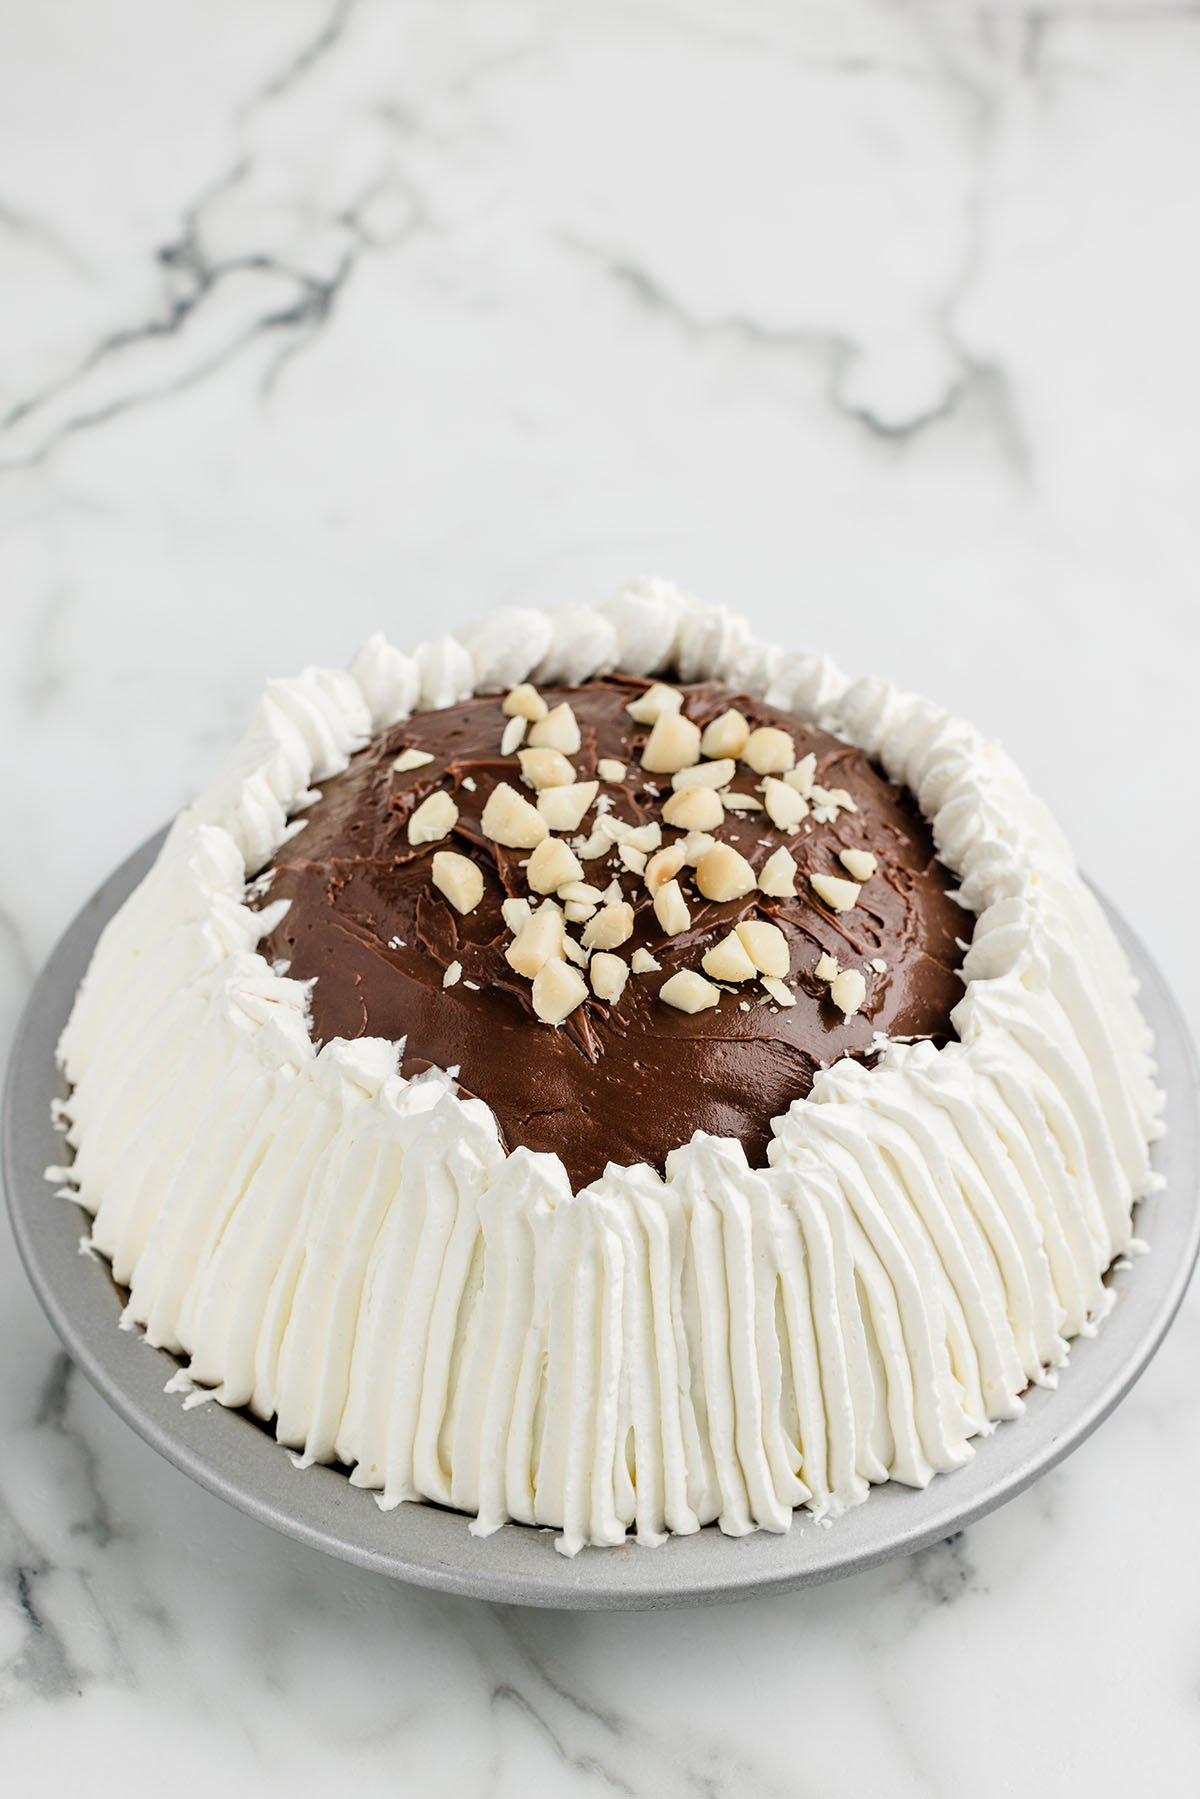 Hula Pie with whipped topping and chopped nuts.